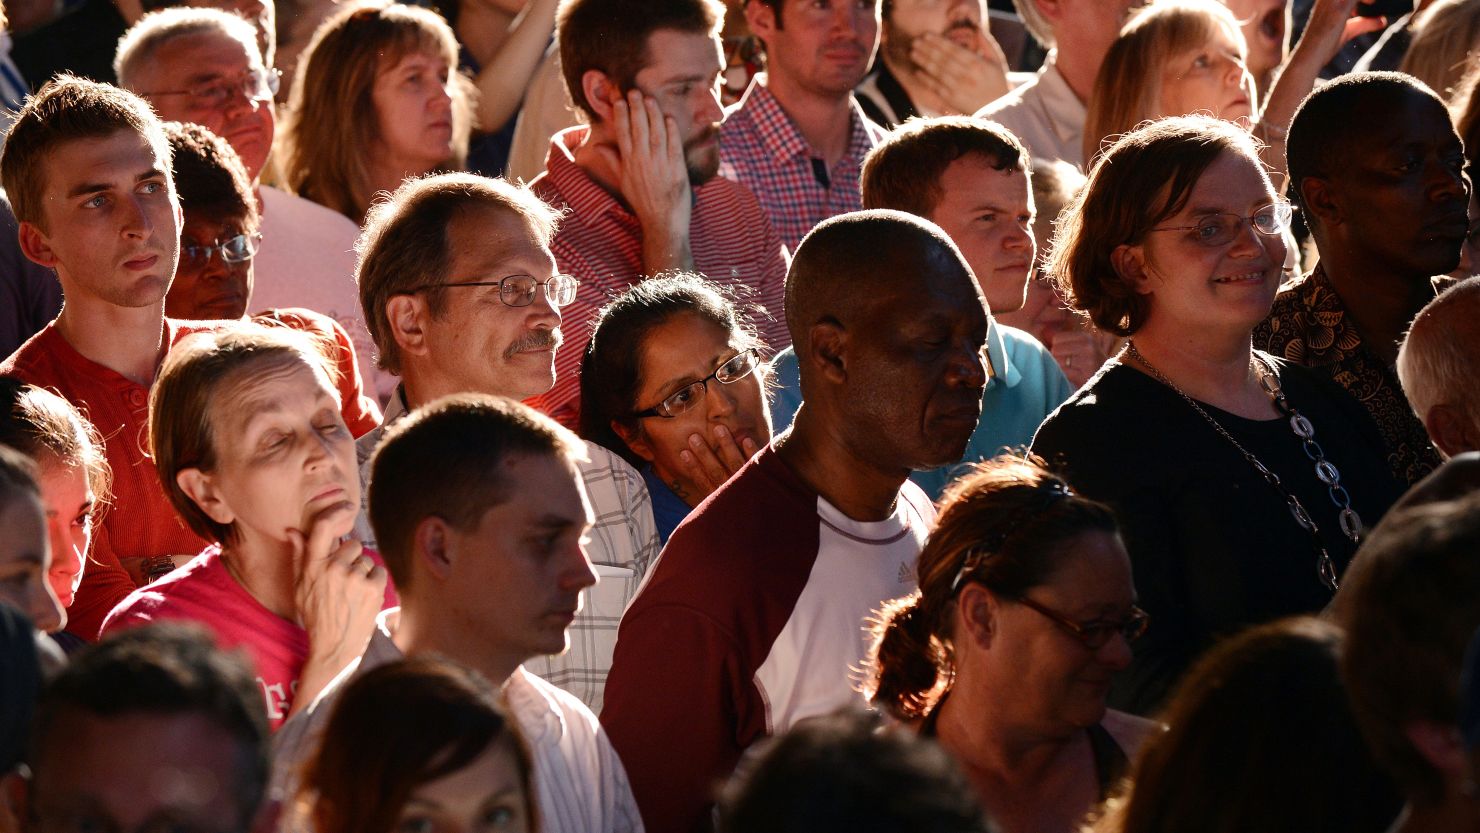 Supporters listen as President Barack Obama speaks at a campaign event last month in Des Moines, Iowa.